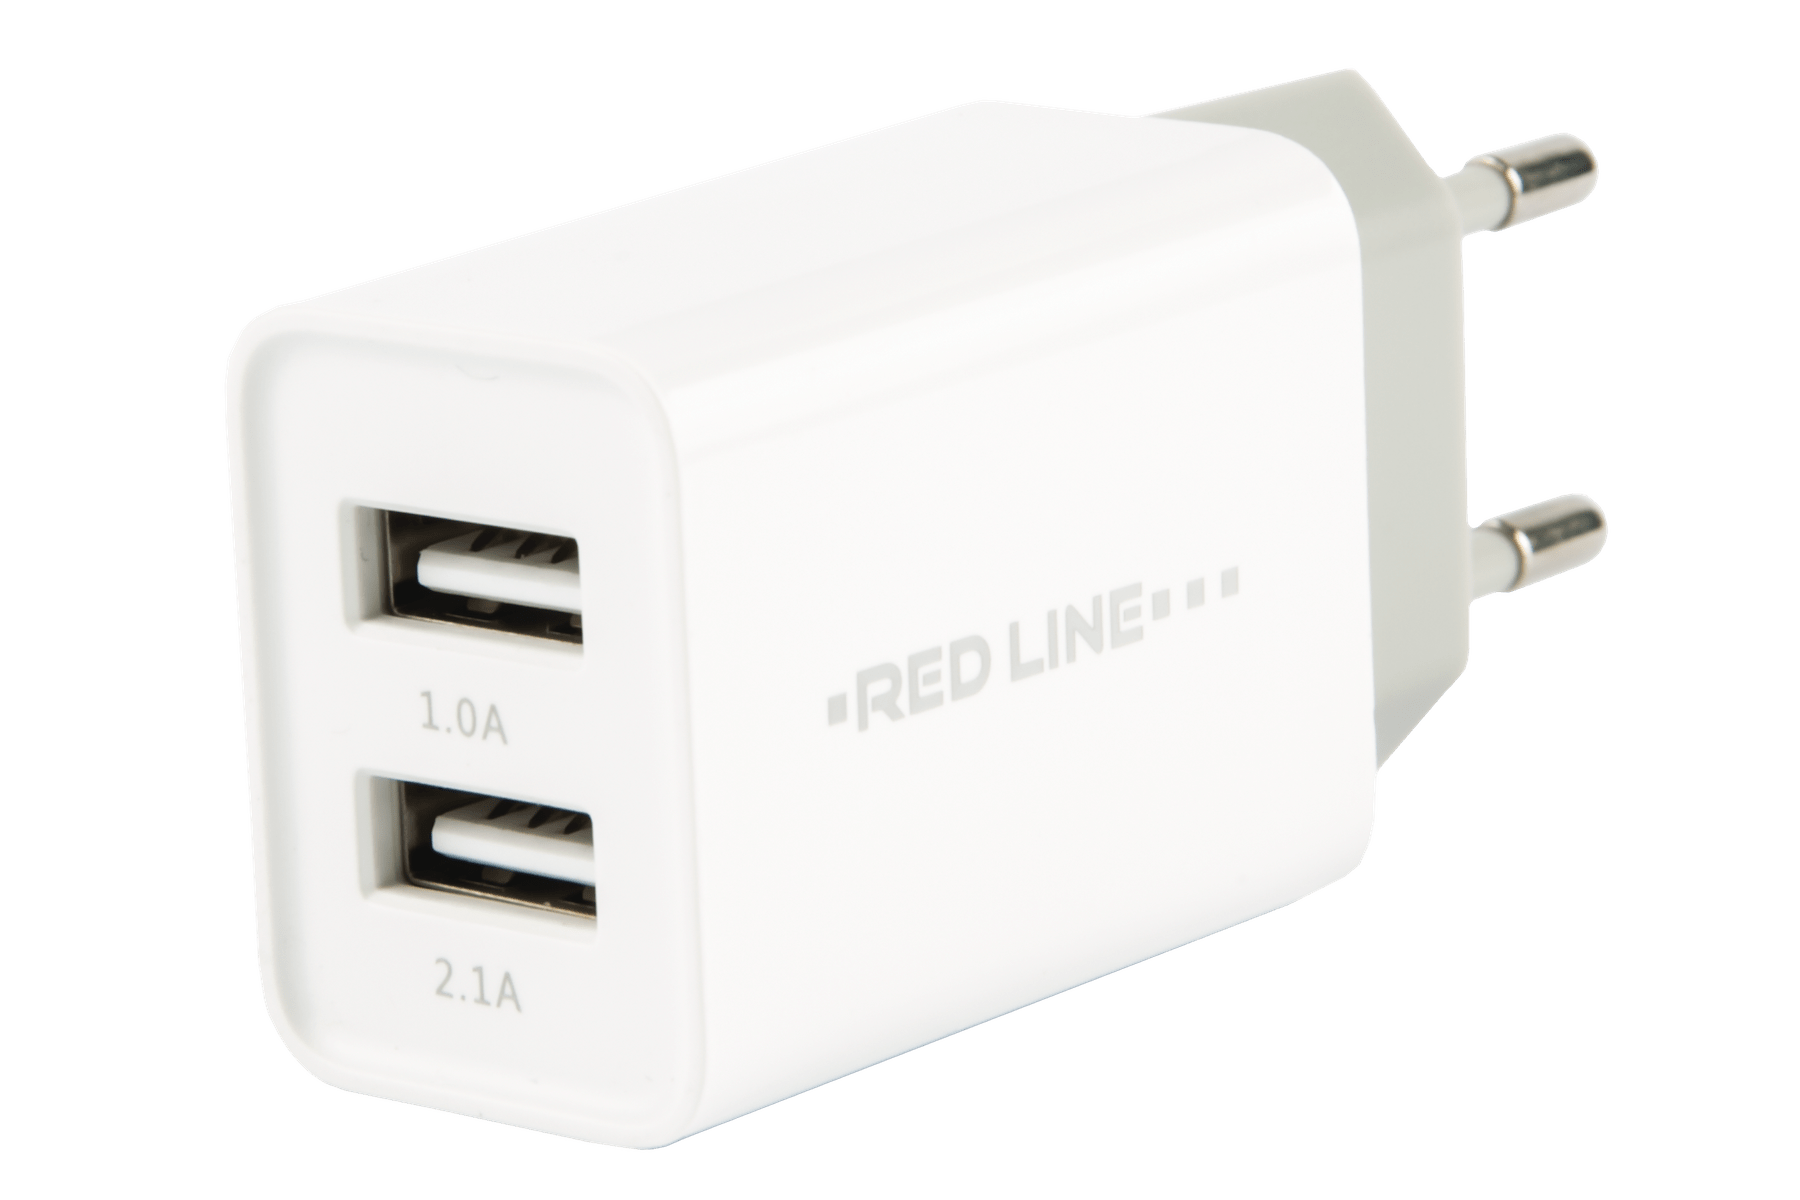 СЗУ Red Line Lux 2 USB (модель Z2), 2.1A Fast Charger